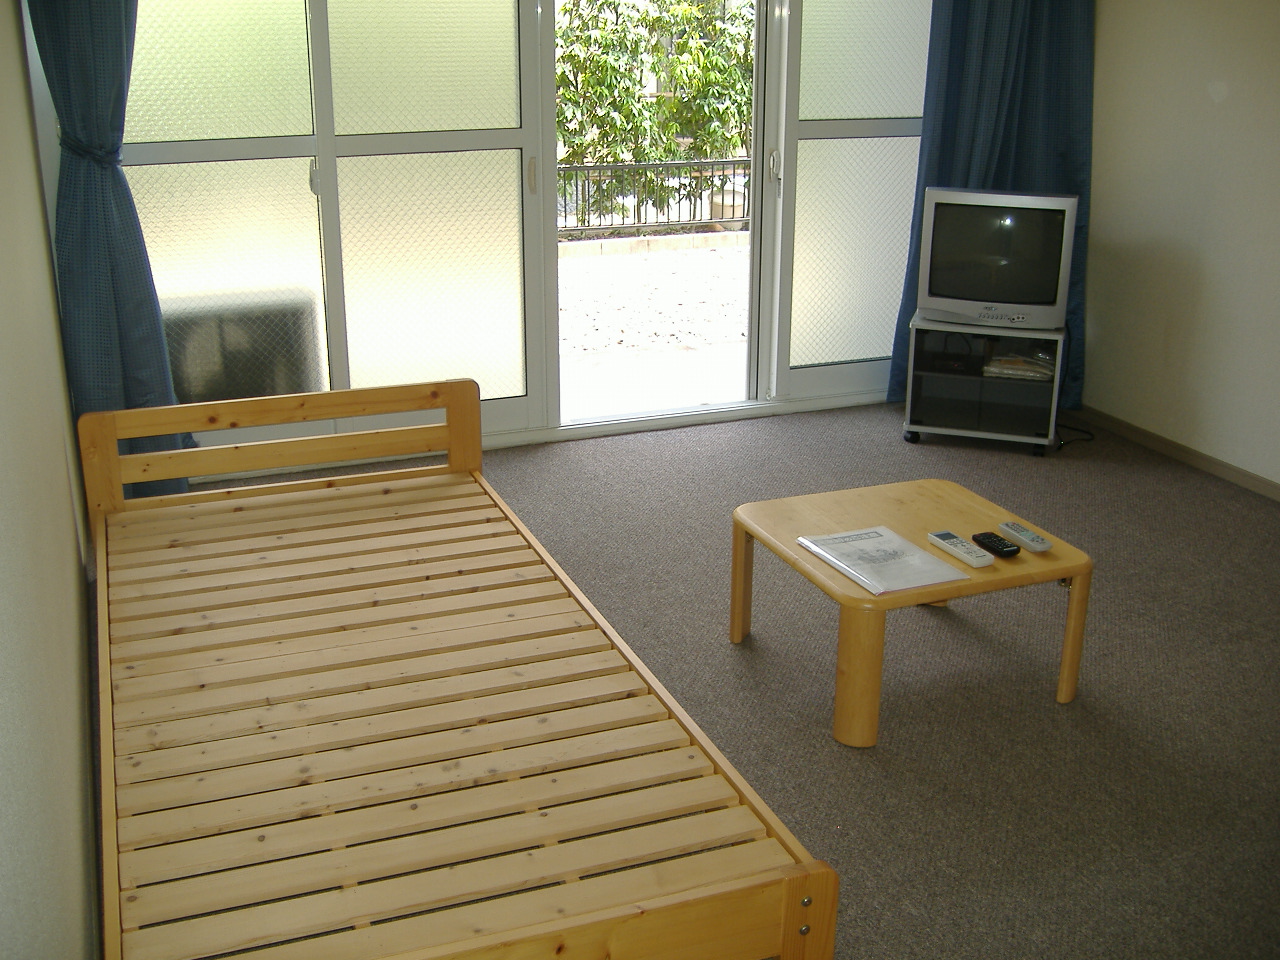 Living and room. Bed ・ It attaches also table !!